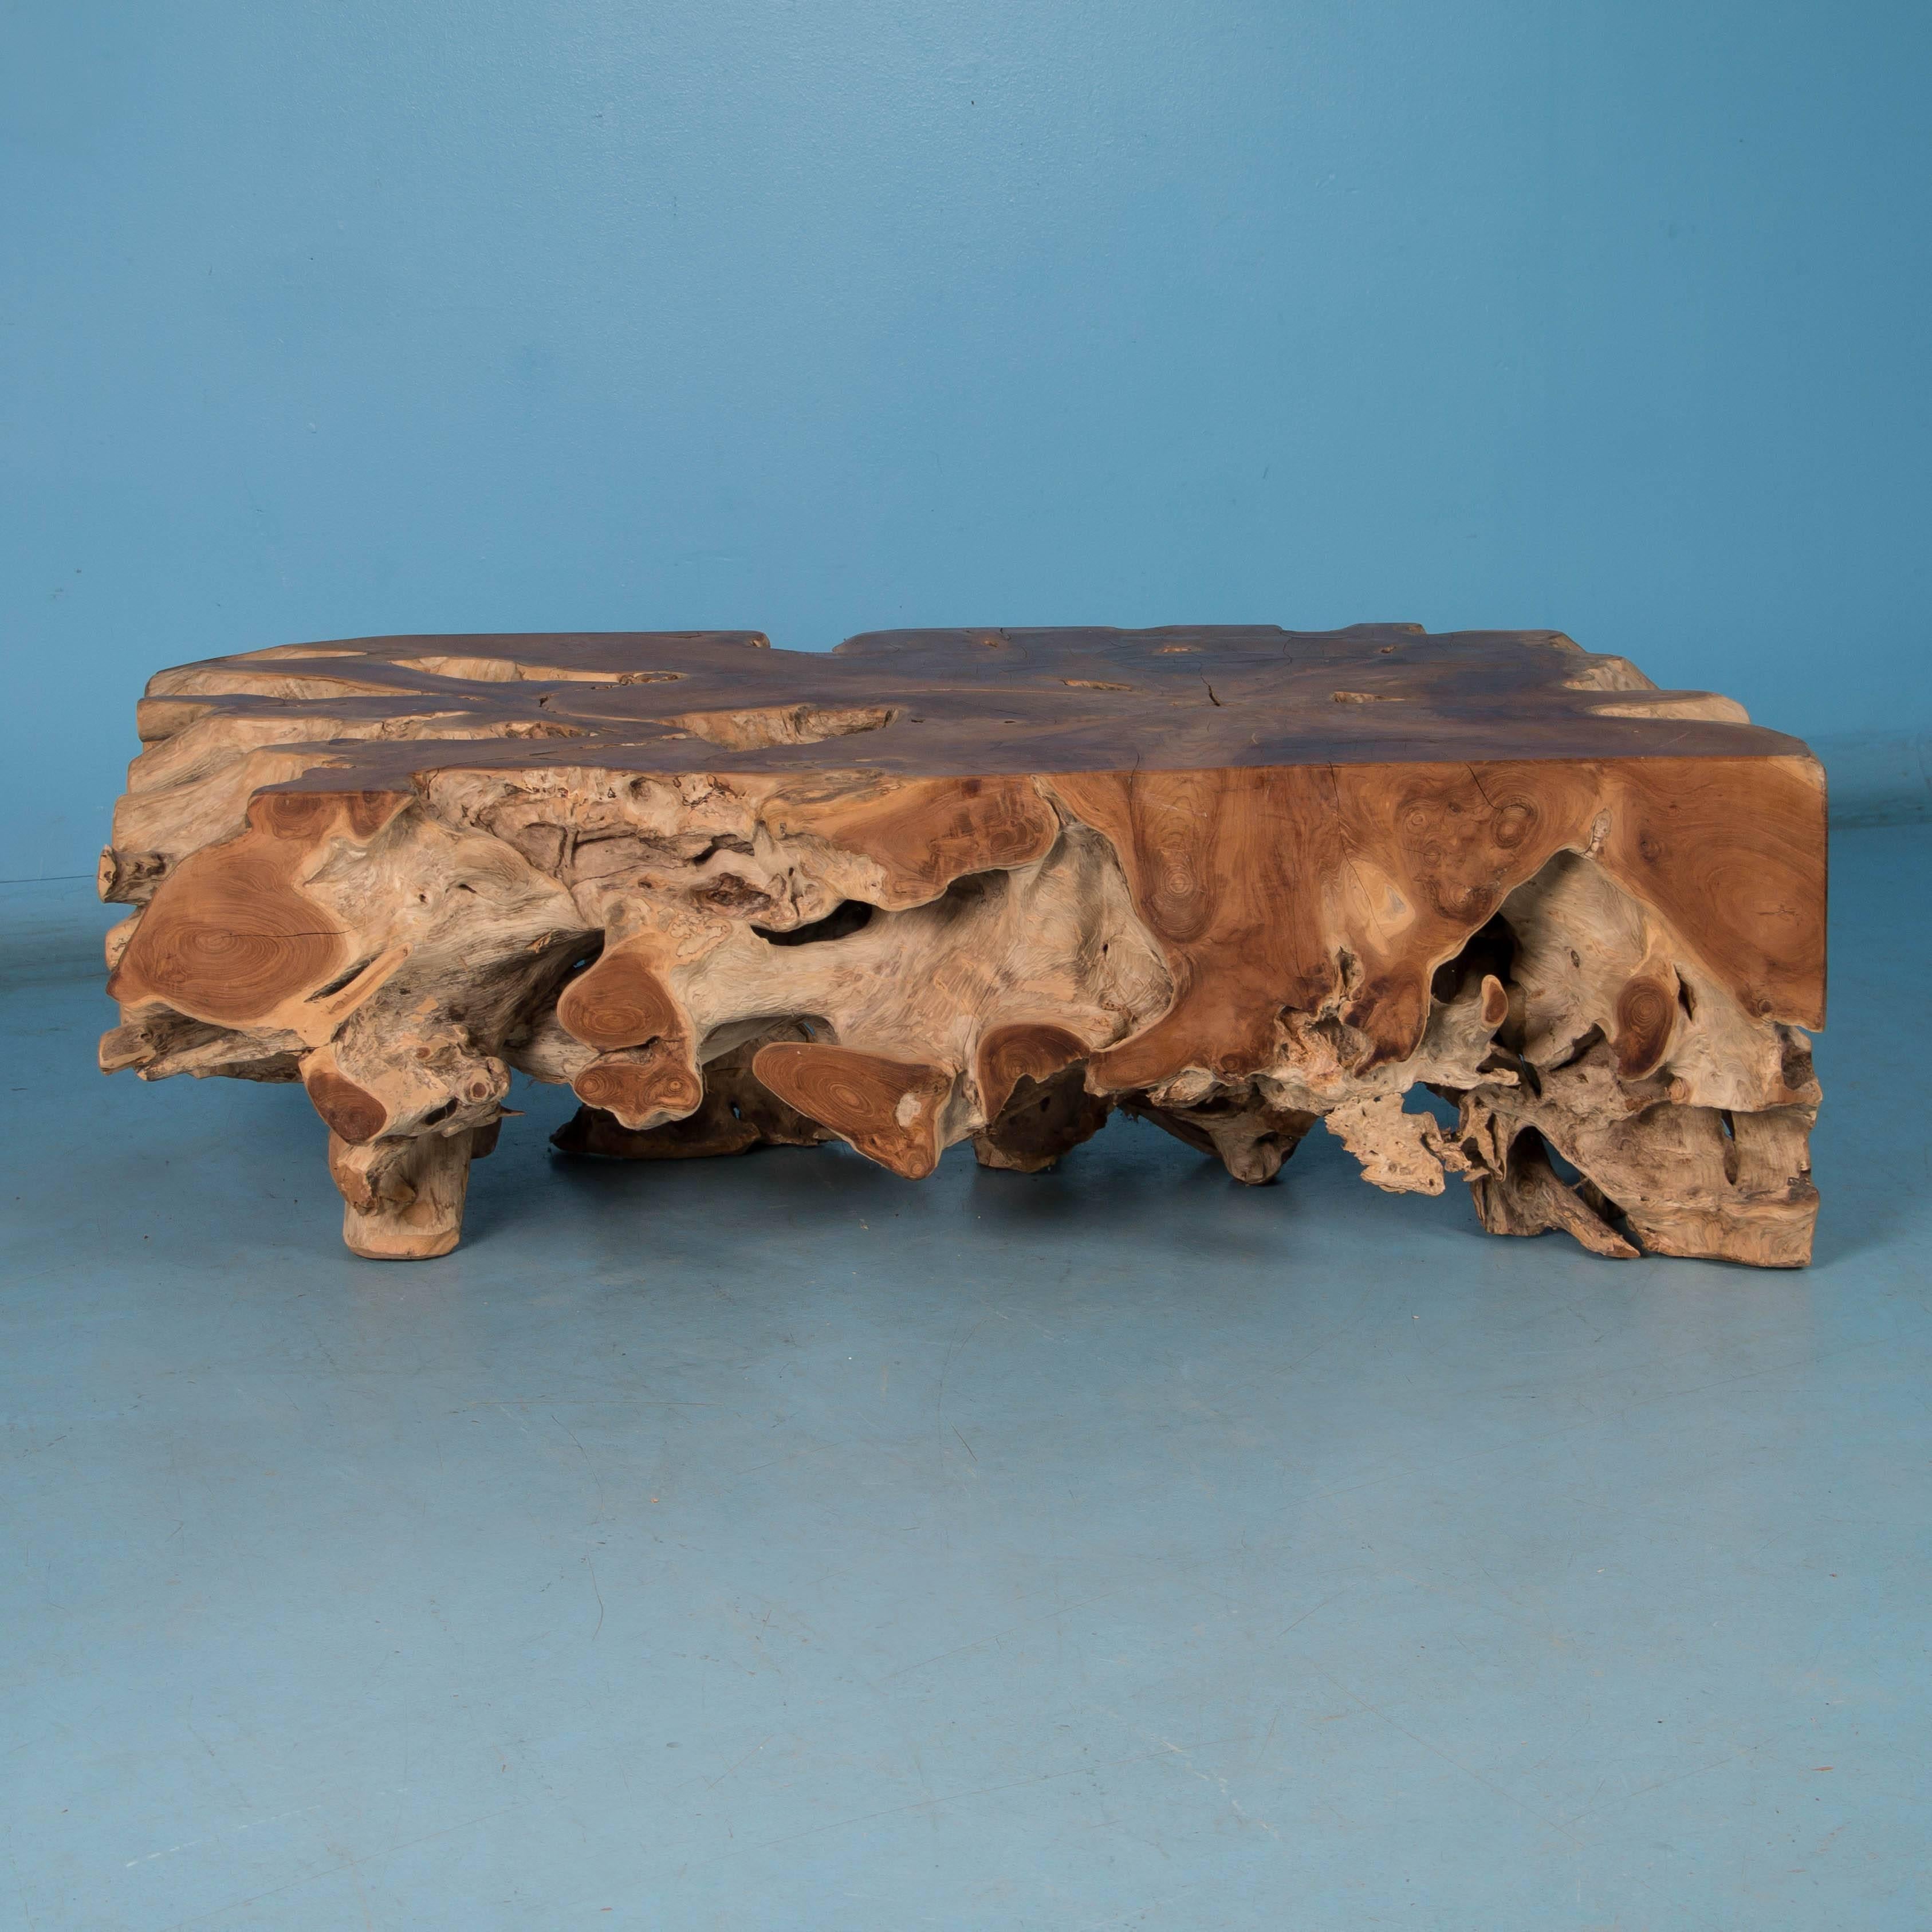 Cut from the root of a large hardwood tree, and squared on all sides, the style of this unusual coffee table slab is a combination of exotic and modern. The light outer wood layer contrasts nicely with the heartwood with colors that range from light